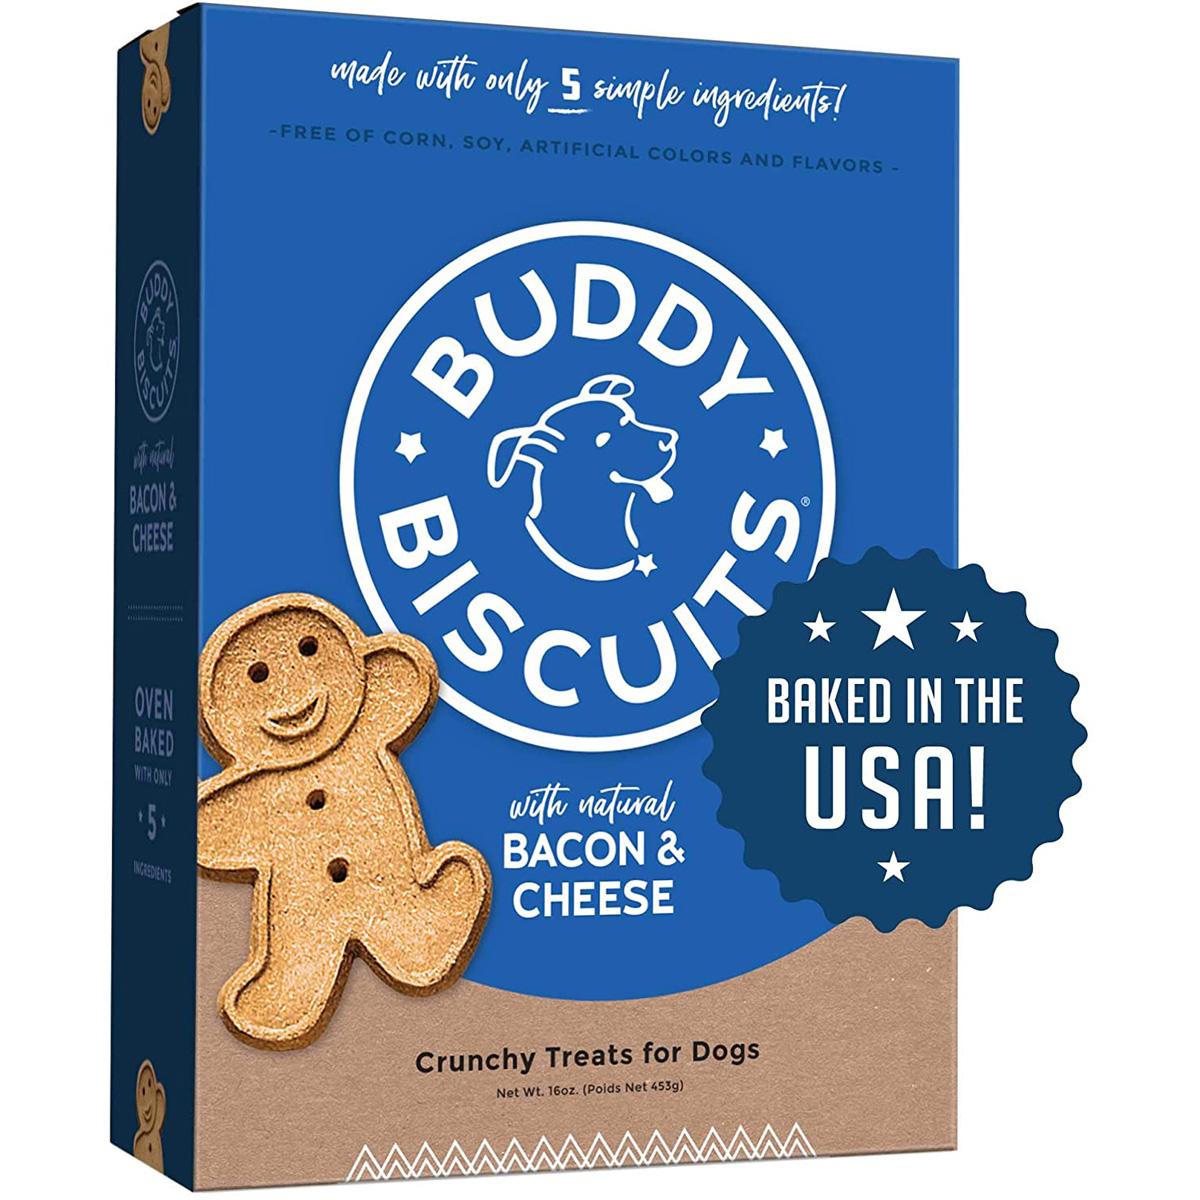 Buddy Biscuits with Bacon and Cheese Oven Baked Dog Treats for $2.67 Shipped